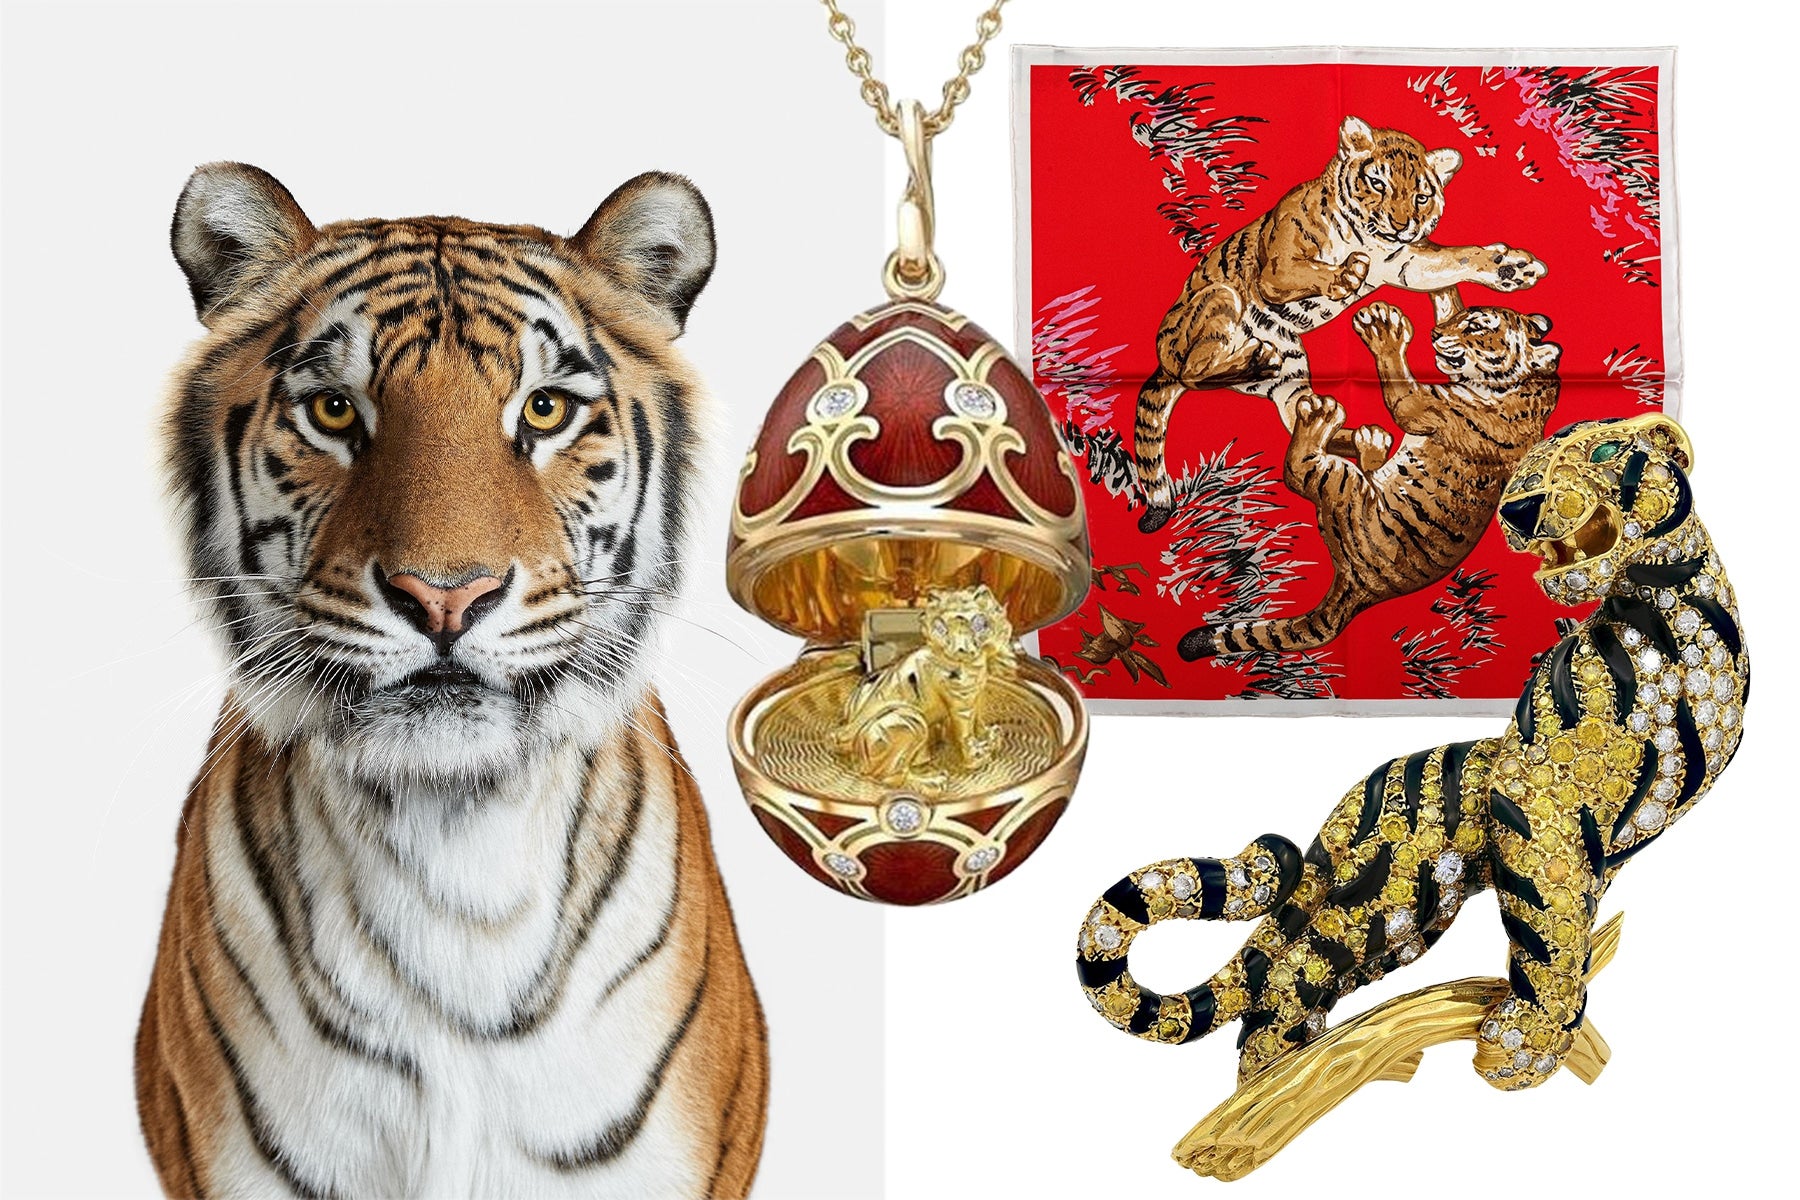 featured image for post: Ring in the Year of the Tiger with These 22 Lucky Luxury Items